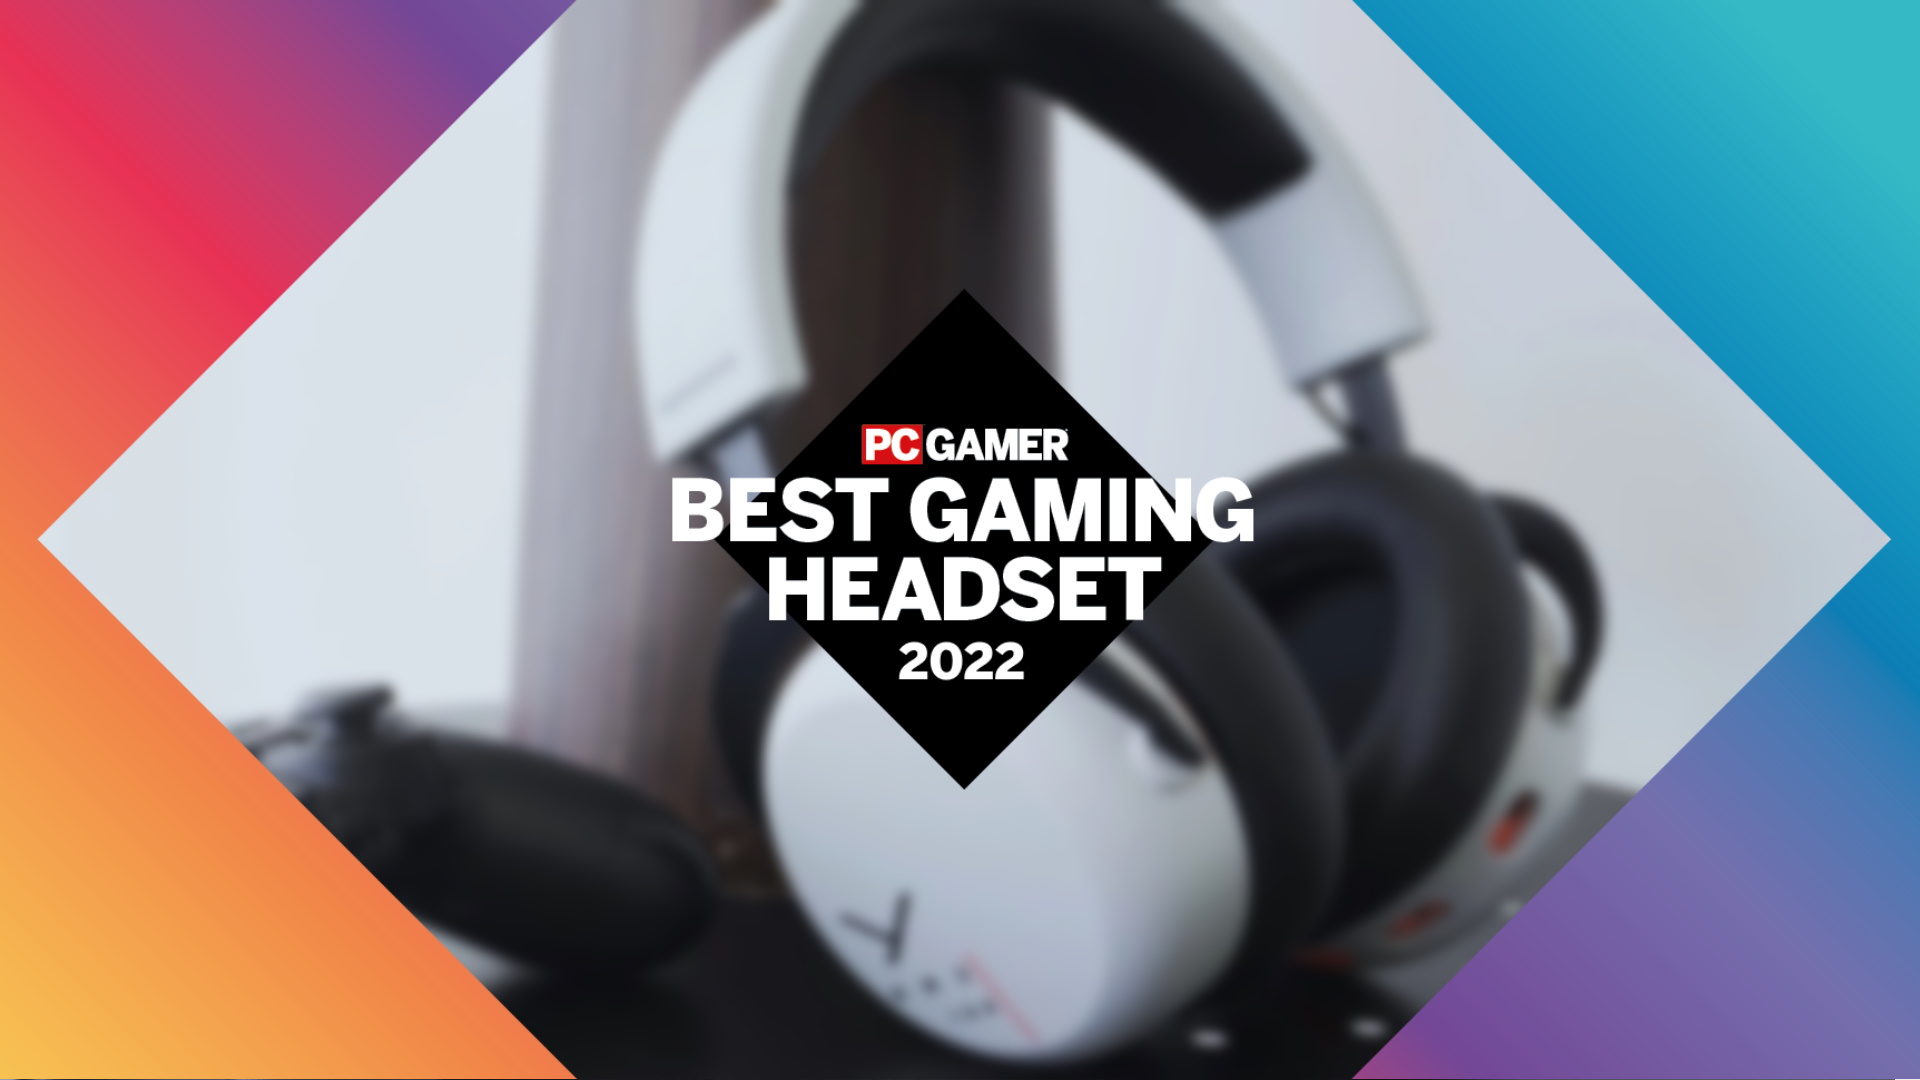  PC Gamer Hardware Awards: The best gaming headsets of 2022 